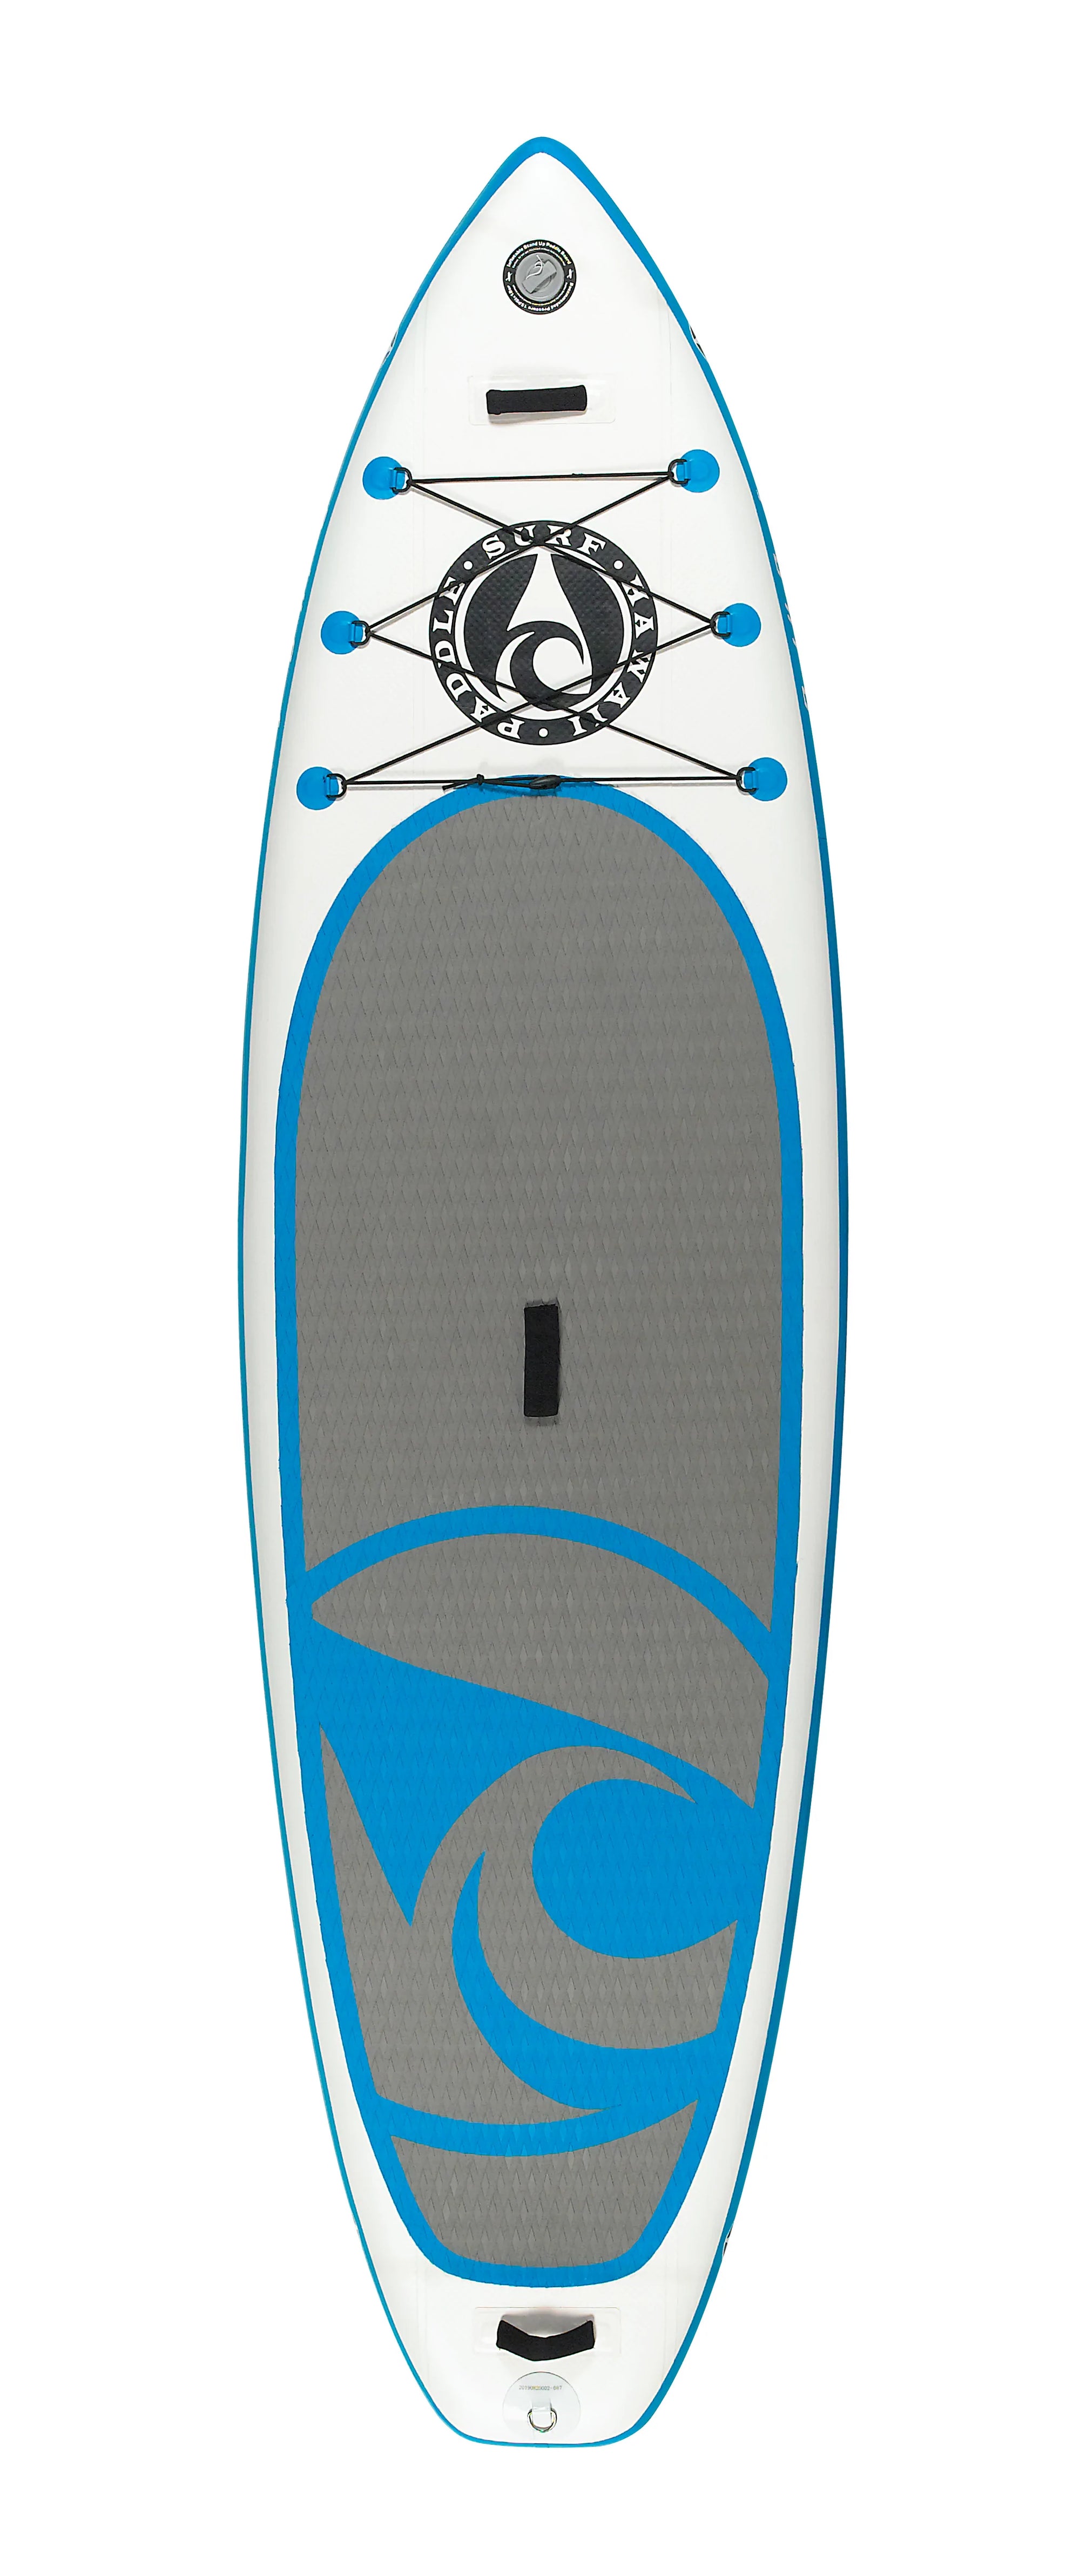 10'6 inSup Package